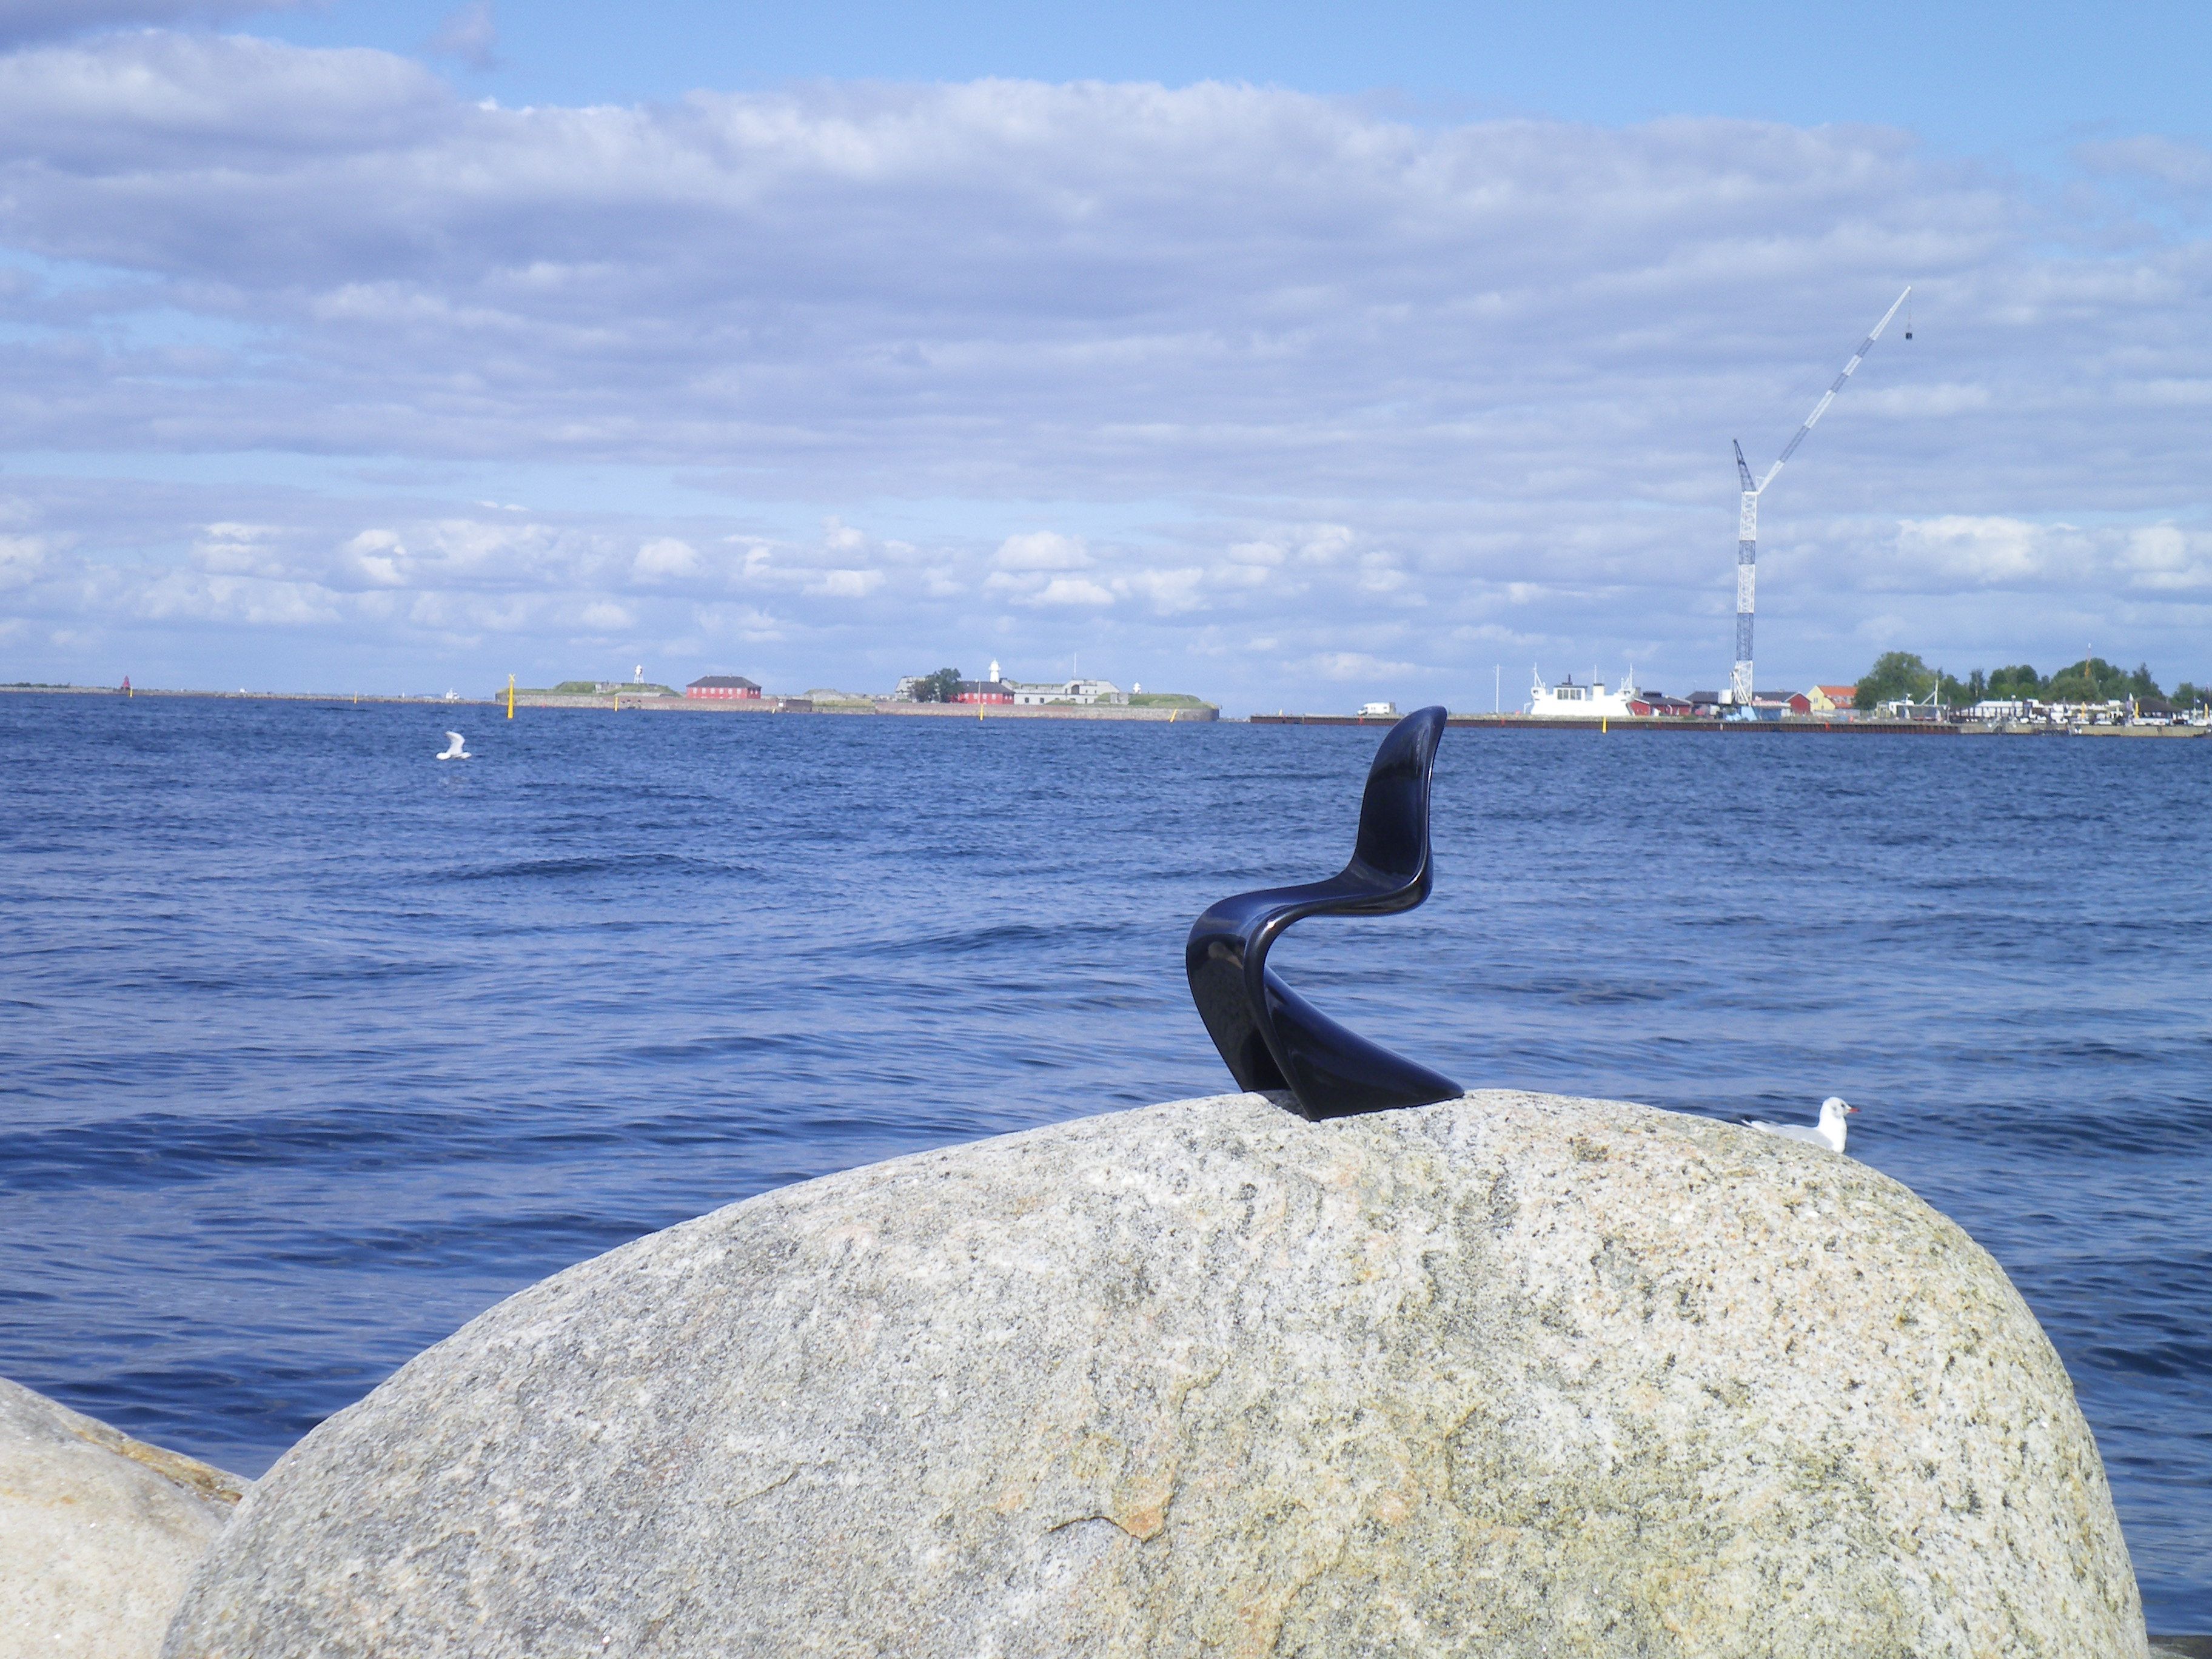 The Little Mermaid and the Panton Chair - two of Copenhagens most important landmarks